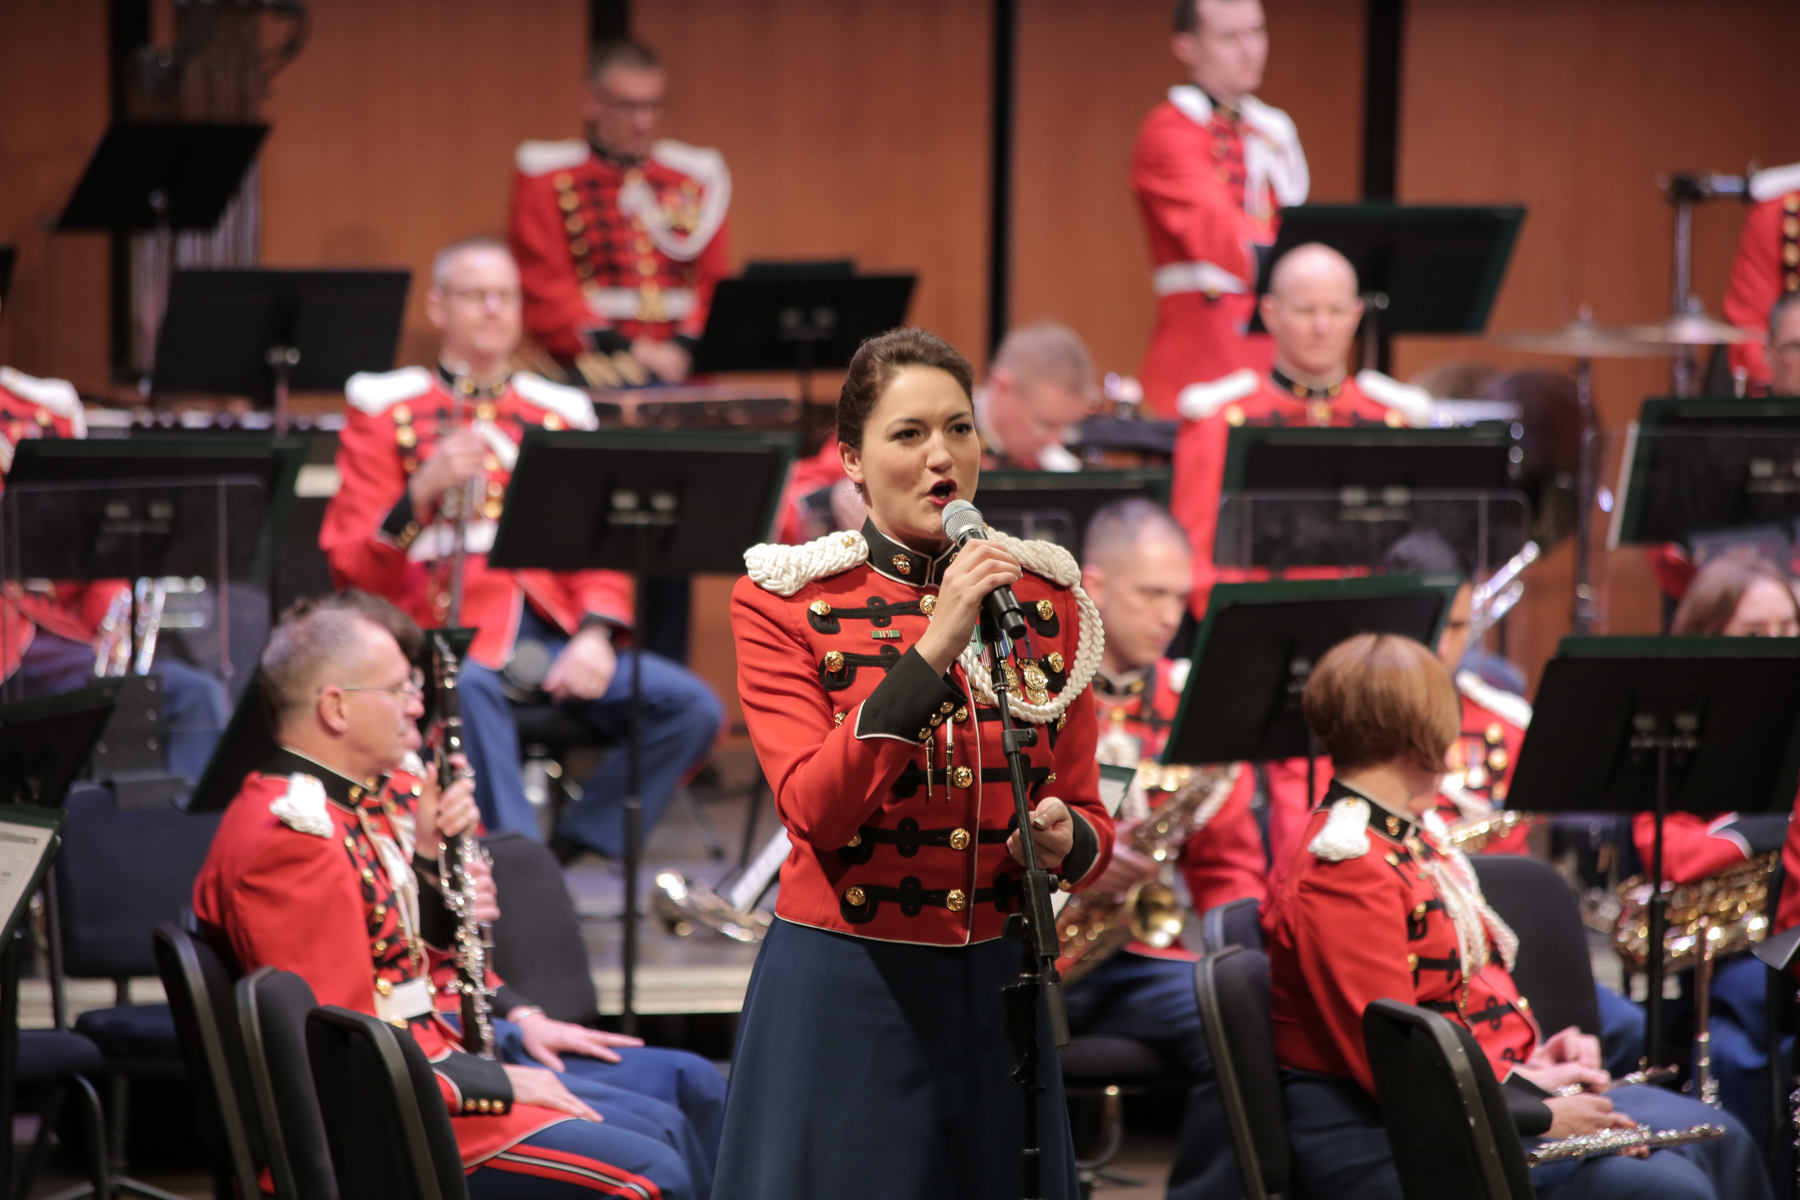 College of Music alumna Gunnery Sgt. Sara Sheffield is the first featured female vocal soloist in Marine Band history and was part of the chorus at the state funeral for former President George H. W. Bush in Washington, D.C.